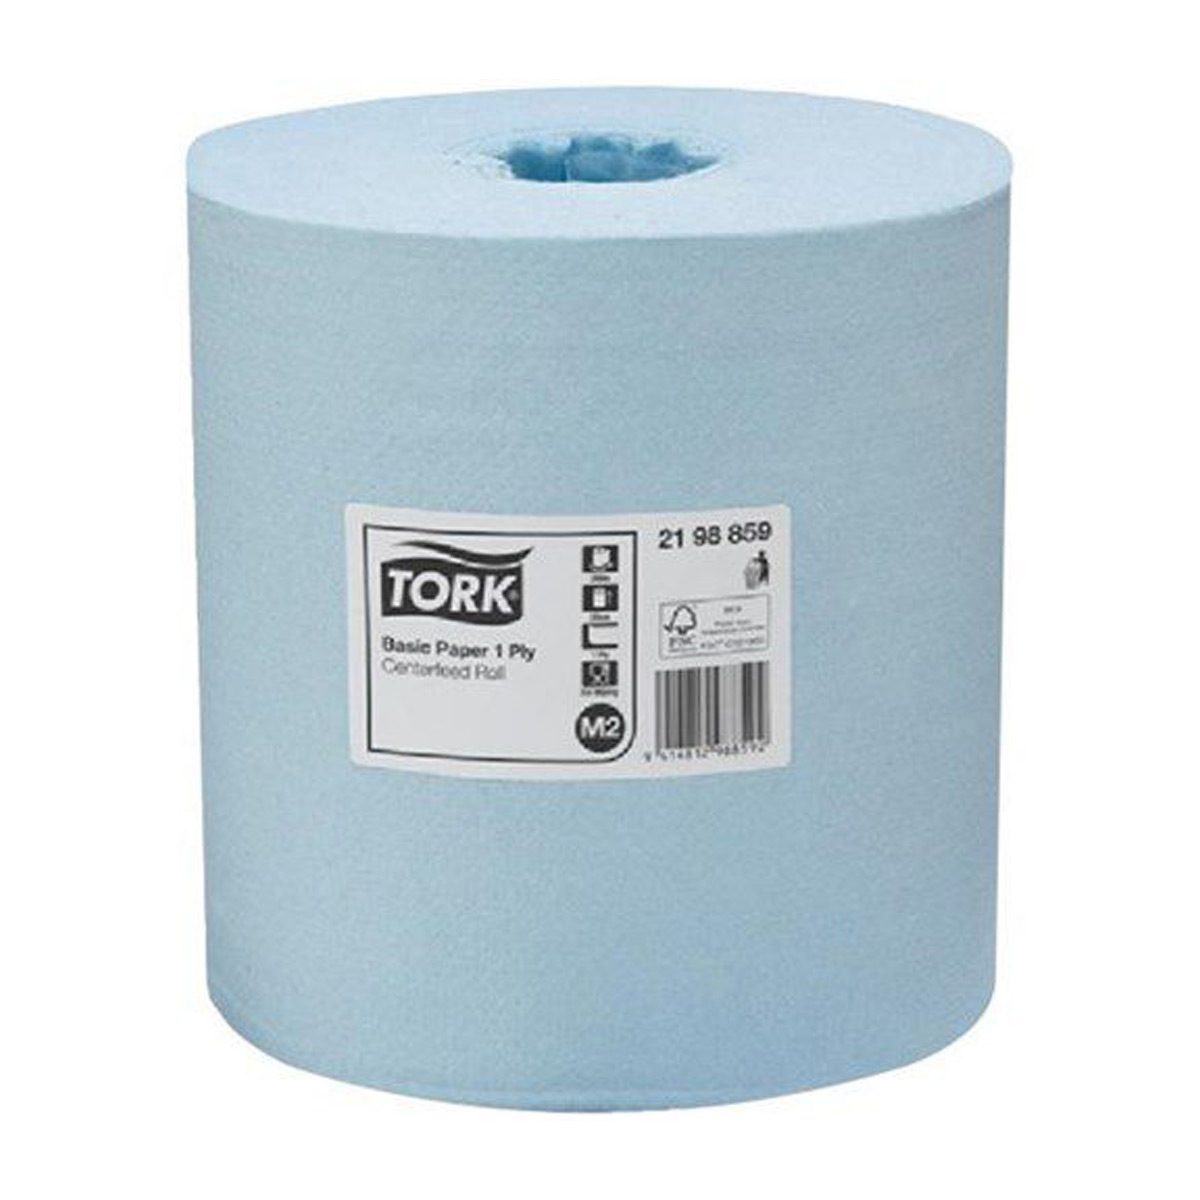 paper-products-paper-towels-tork-blue-centrefeed-towel-1-ply-300m-metres-6-rolls-m2-versatile-wiper-system-high-capacity-dispensers-high-traffic-areas-vjs-distributors-2198859